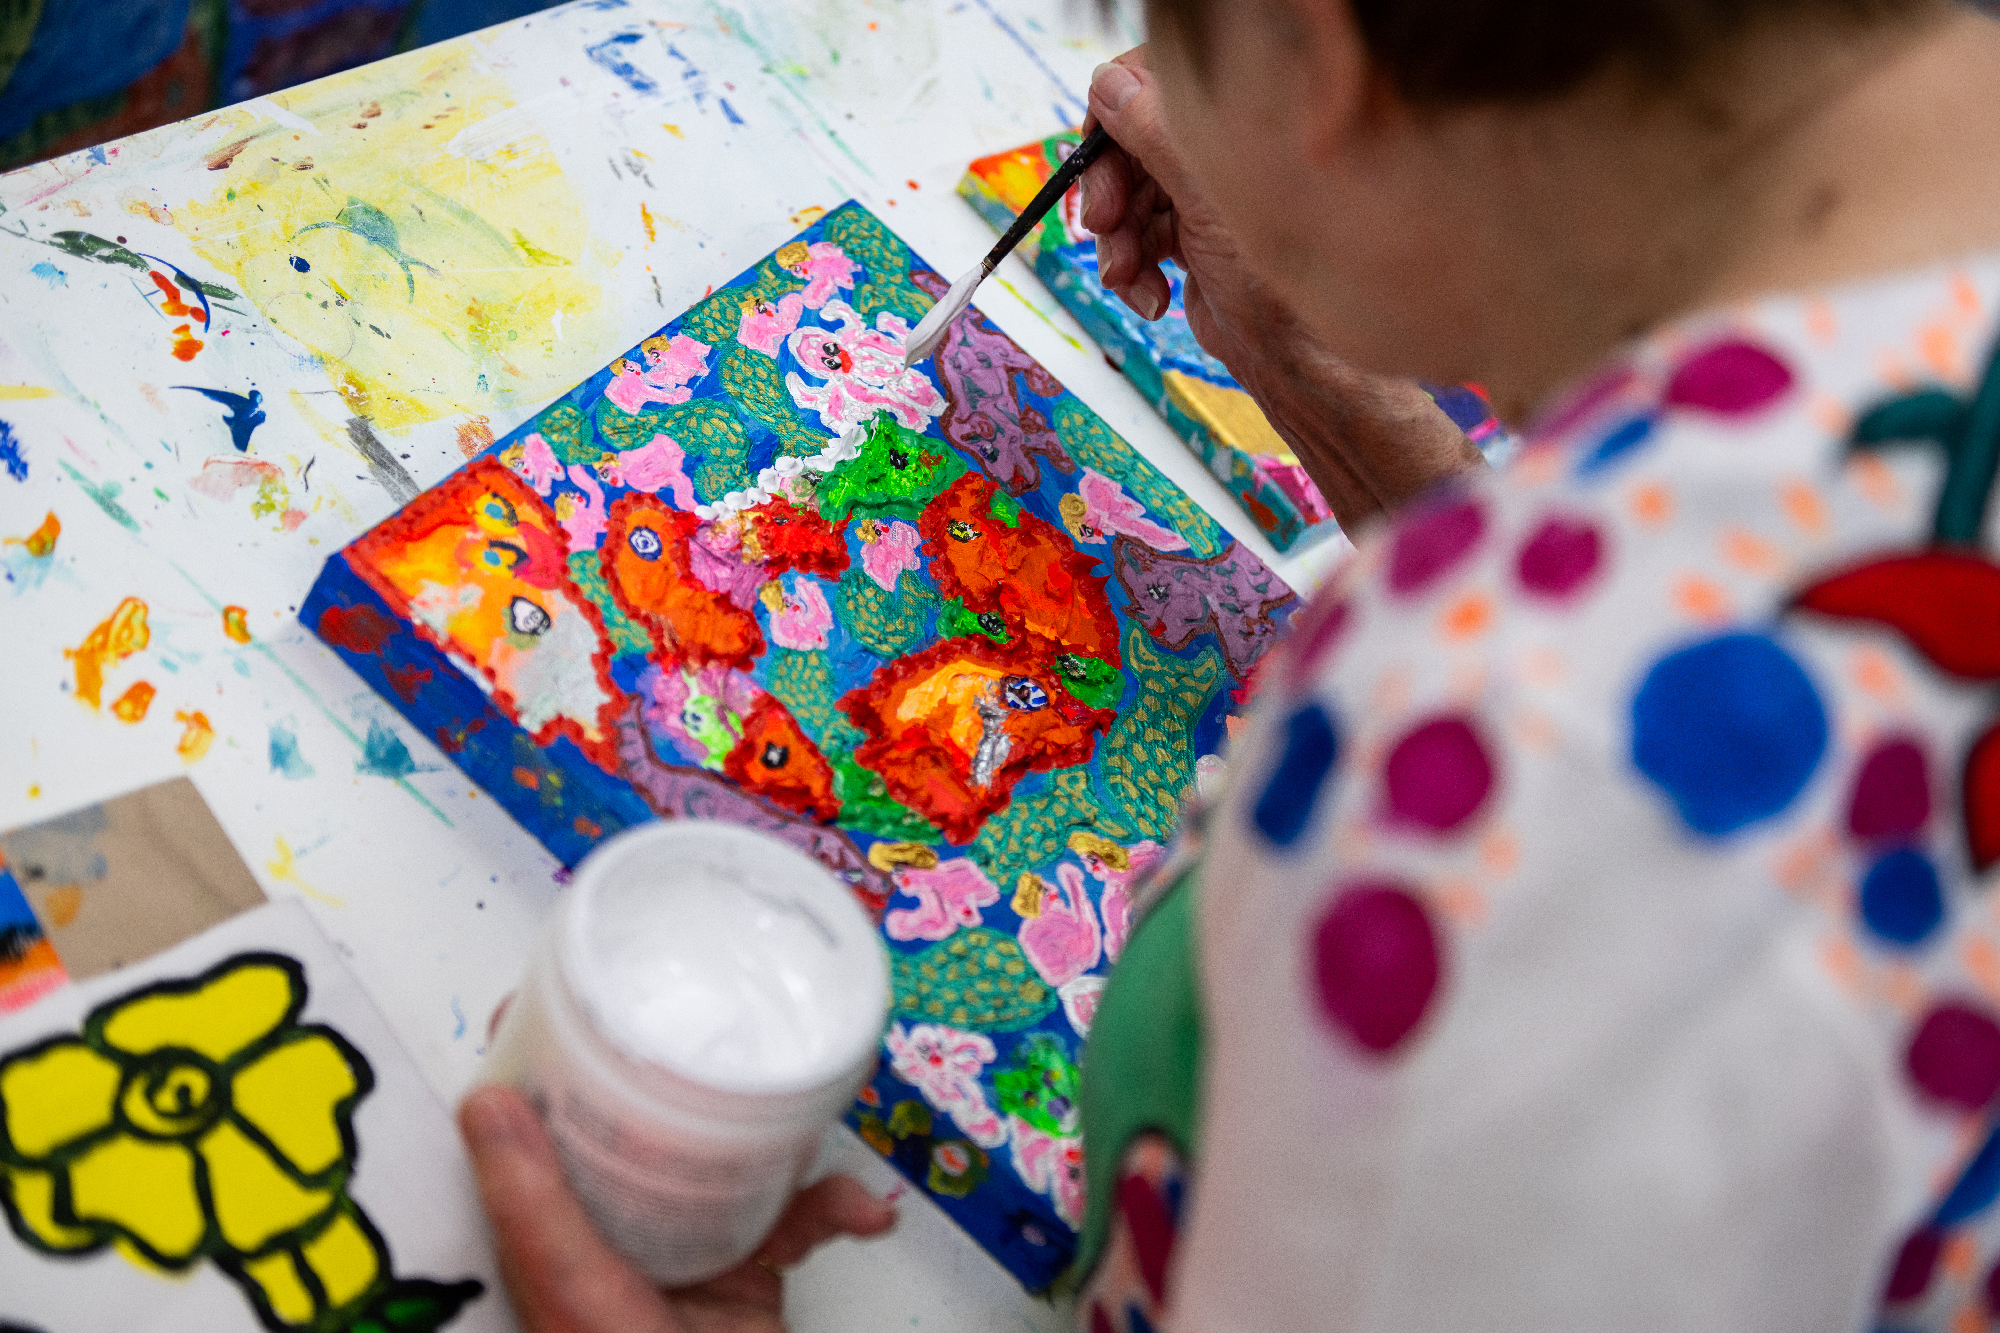 Over the shoulder shot of woman with white paint jar in left hand and paintbrush in right, dabbing thick dots onto a colorful small canvas